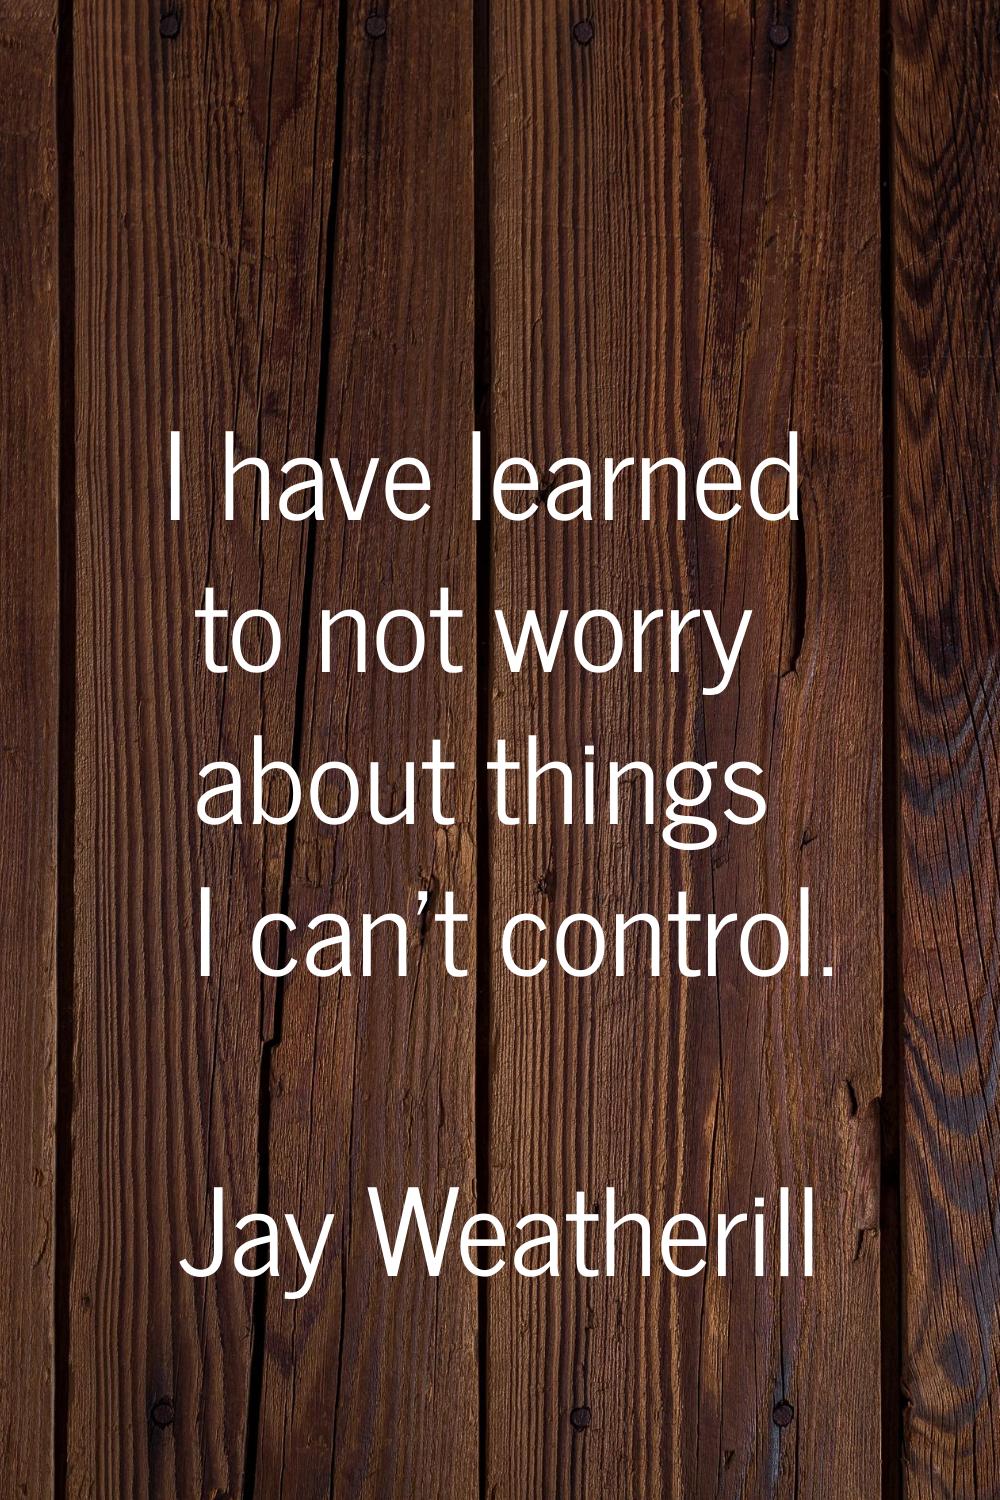 I have learned to not worry about things I can't control.